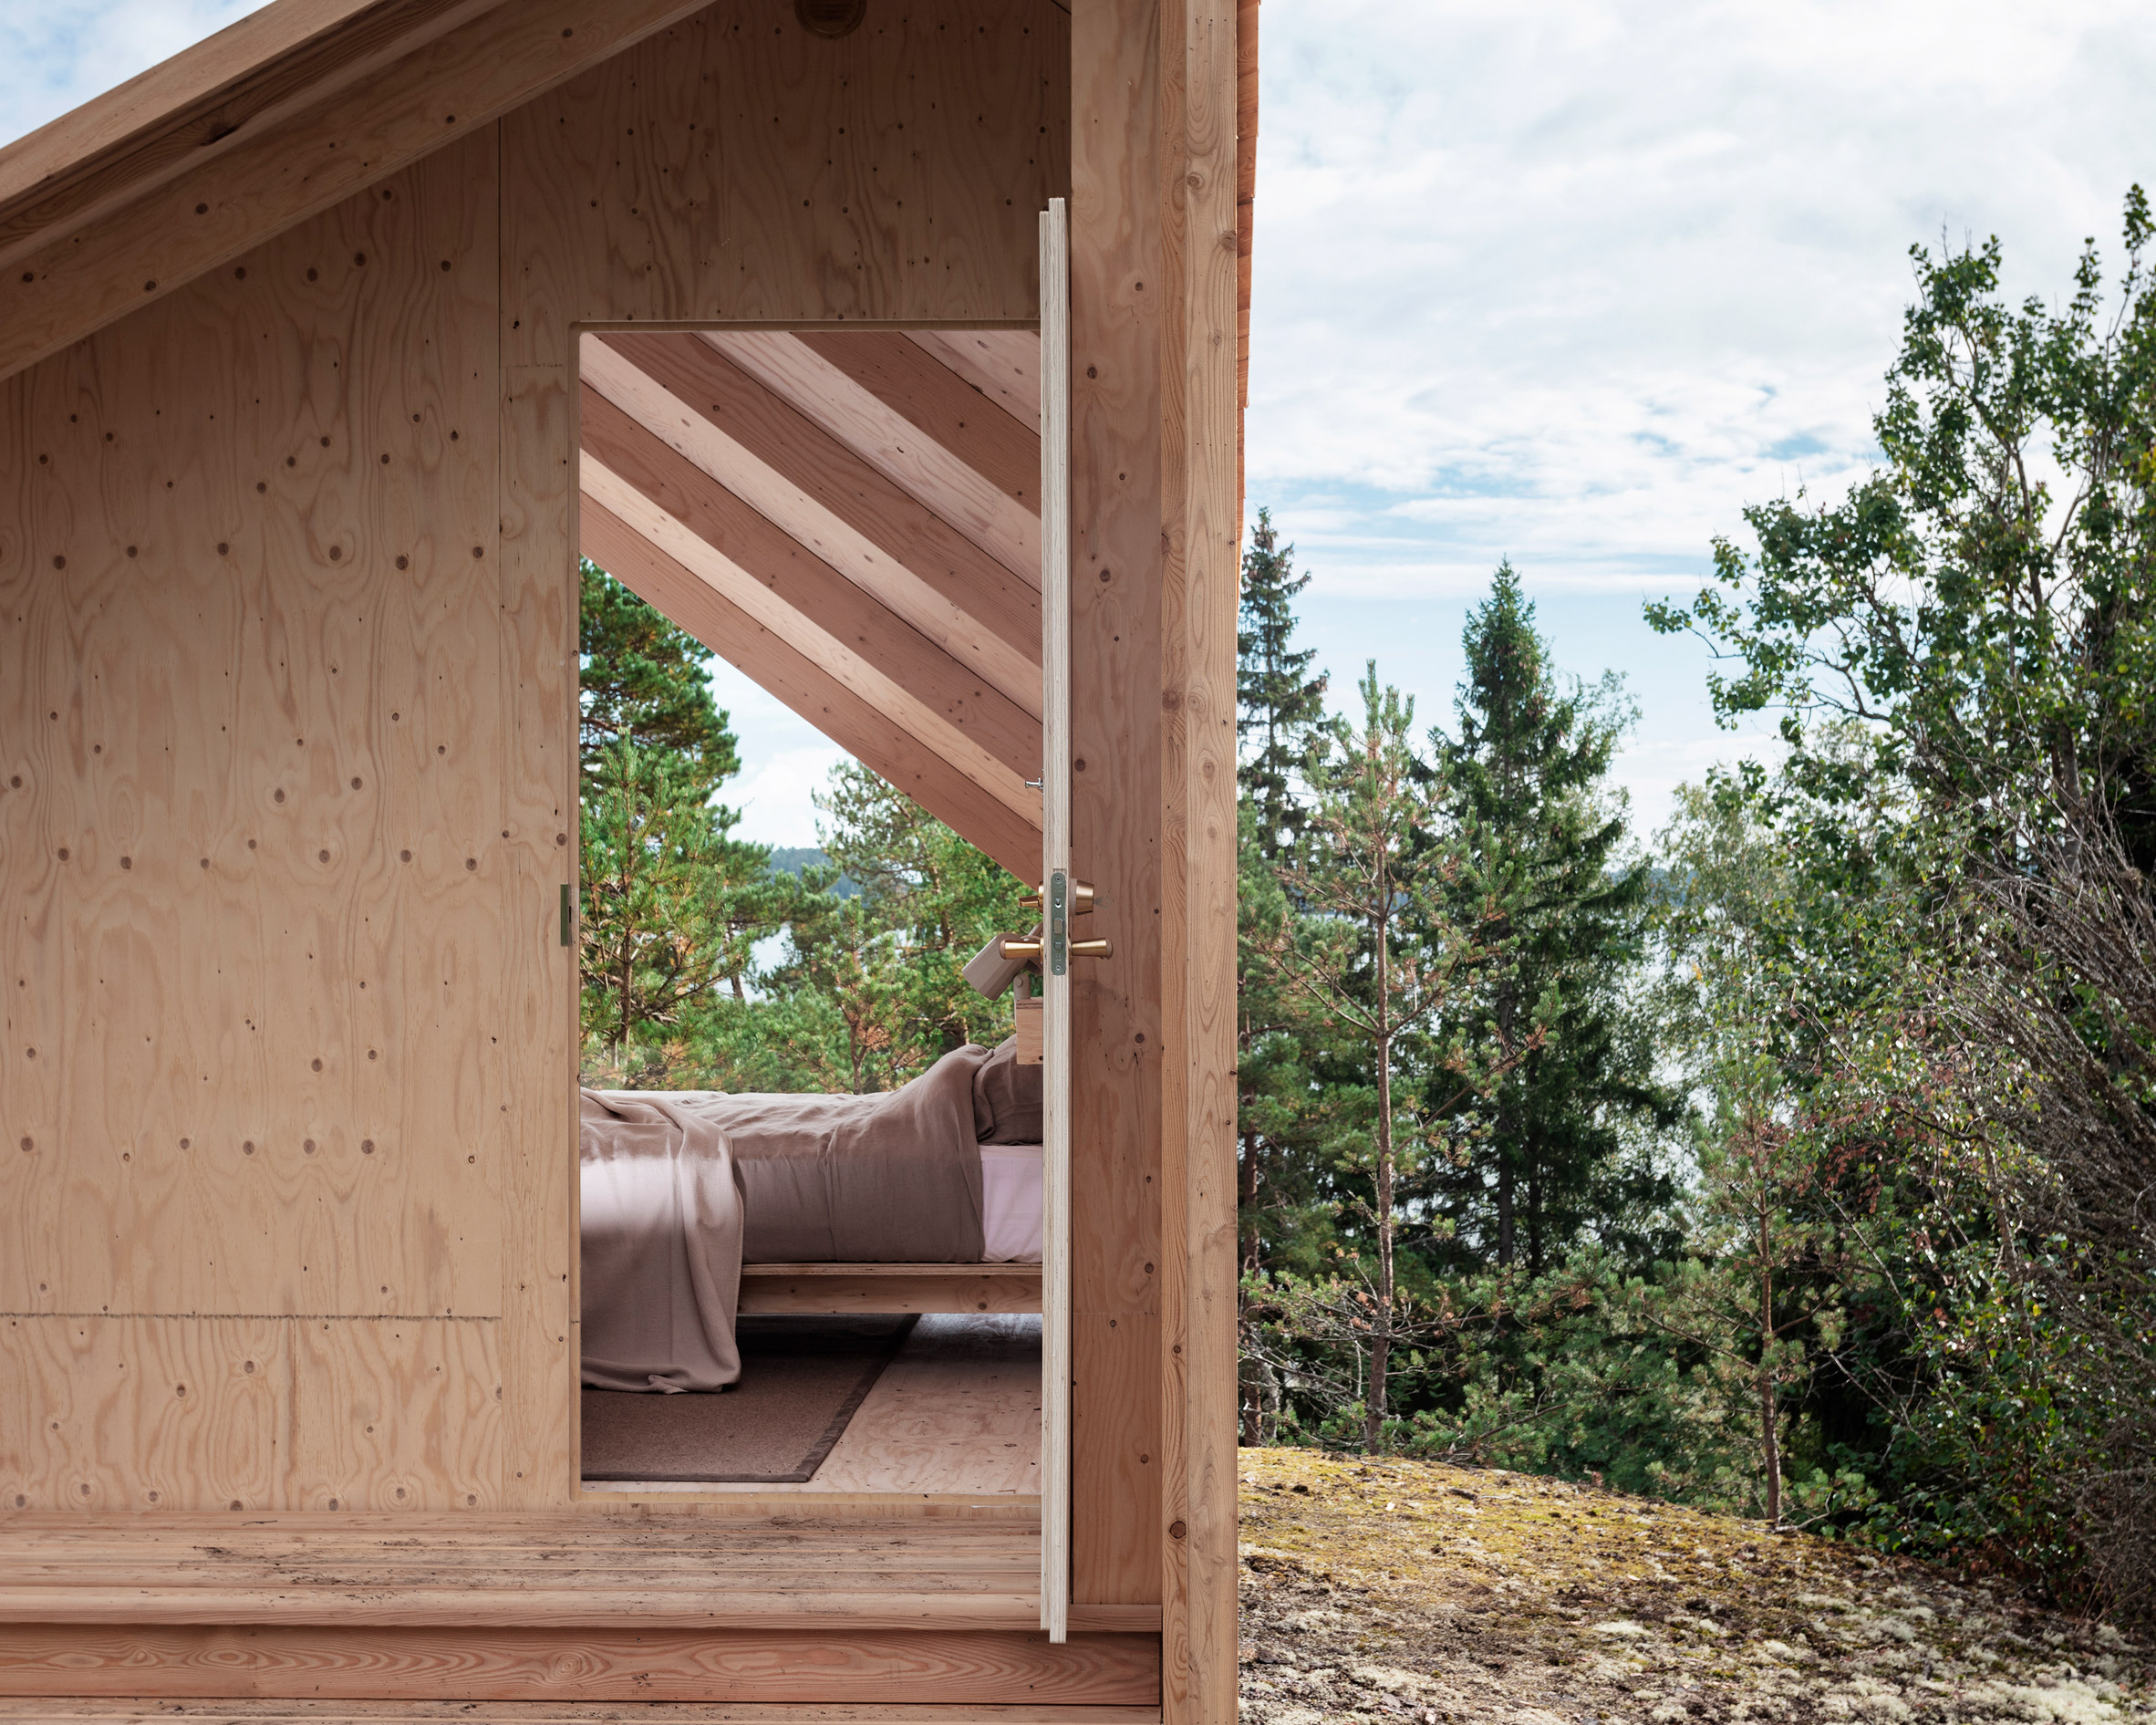 Entrance to the modular Space of Mind cabin prototype by Studio Puisto